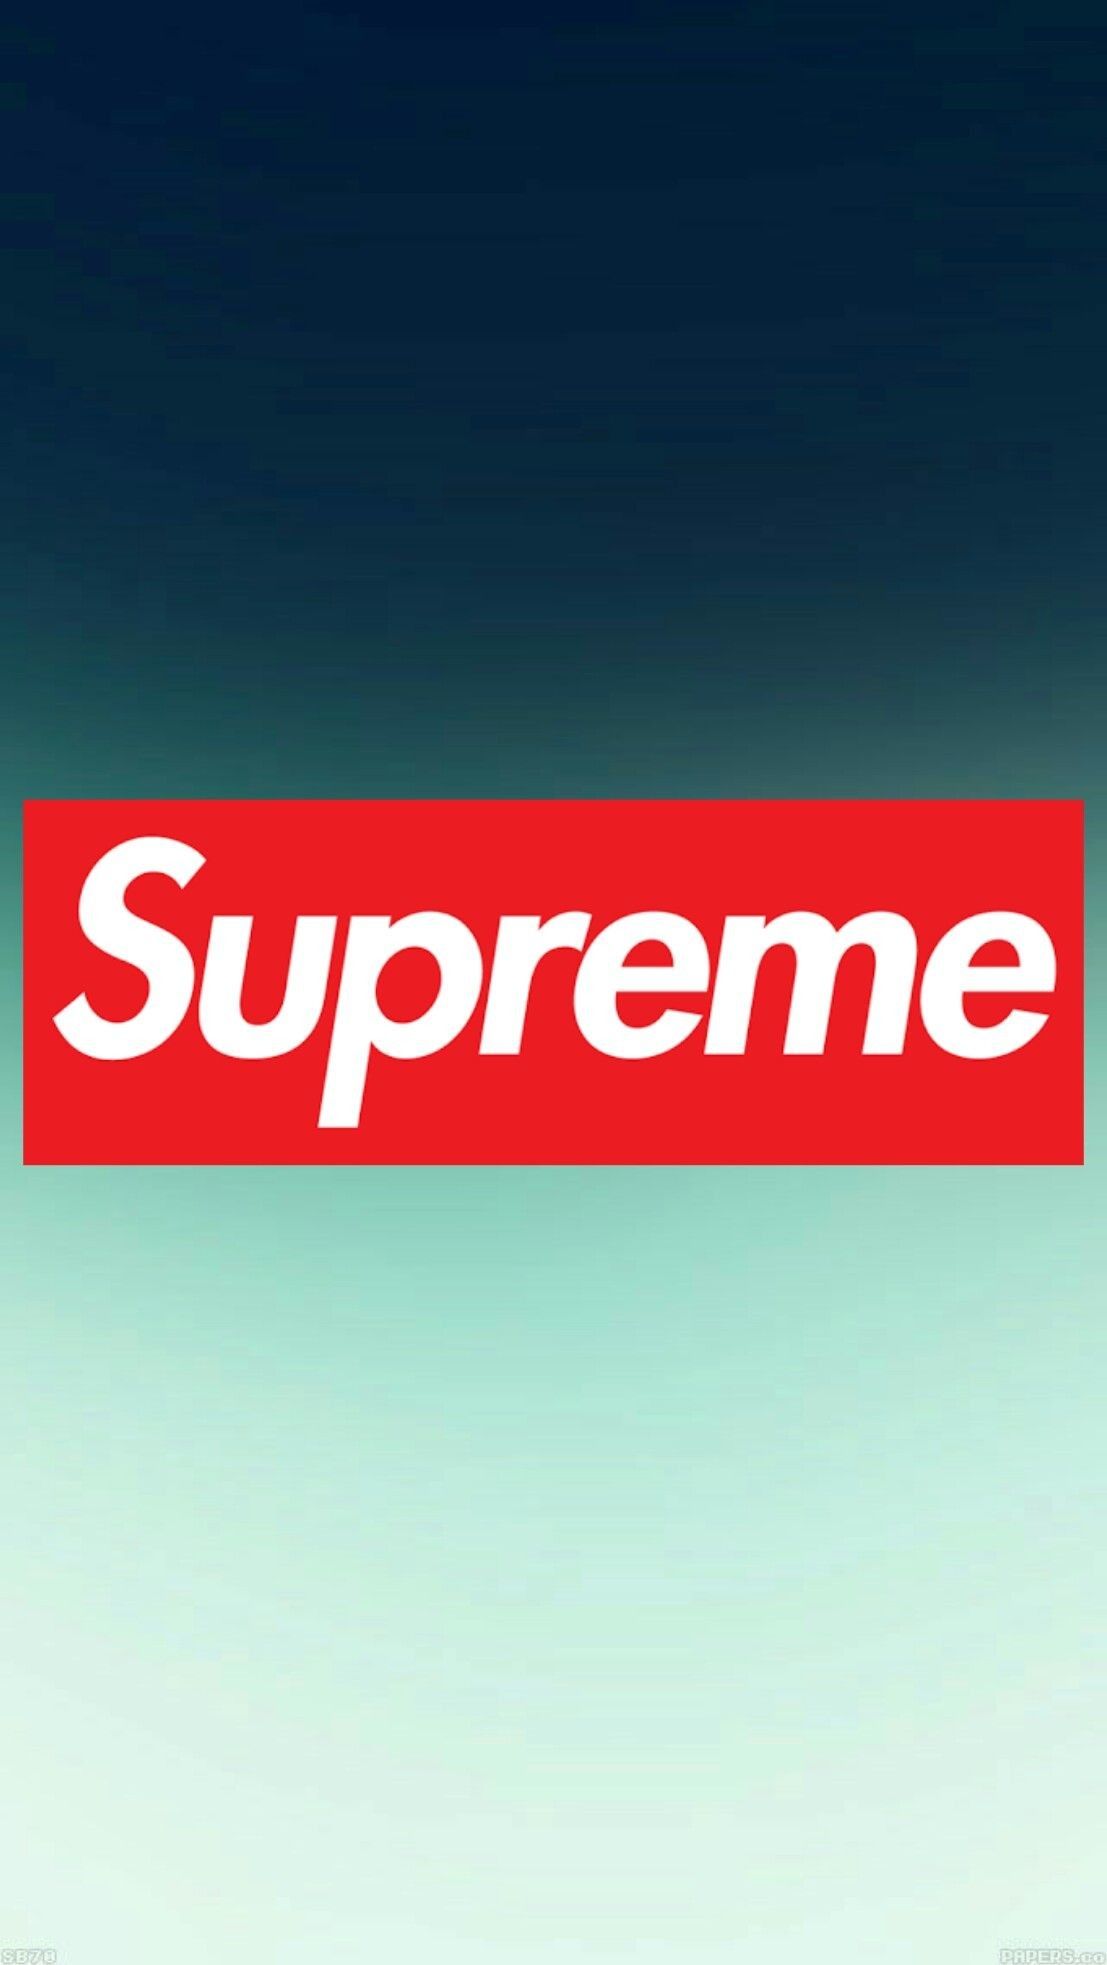 Best Supreme Wallpaper 4K HD 🔥🔥 APK 2.0 for Android – Download Best Supreme  Wallpaper 4K HD 🔥🔥 APK Latest Version from